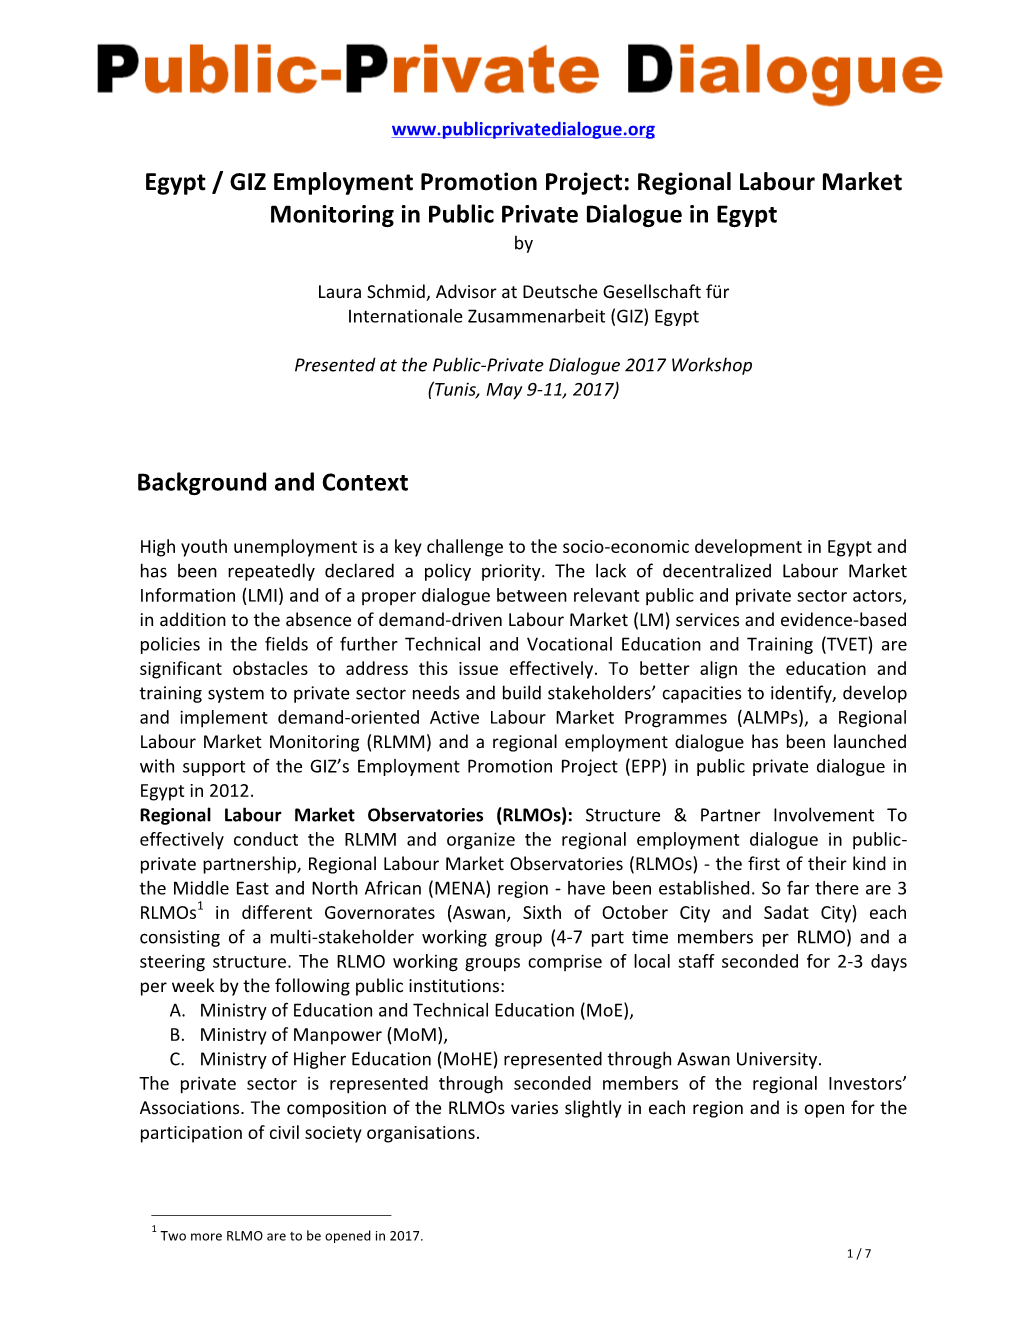 Egypt / GIZ Employment Promotion Project: Regional Labour Market Monitoring in Public Private Dialogue in Egypt By